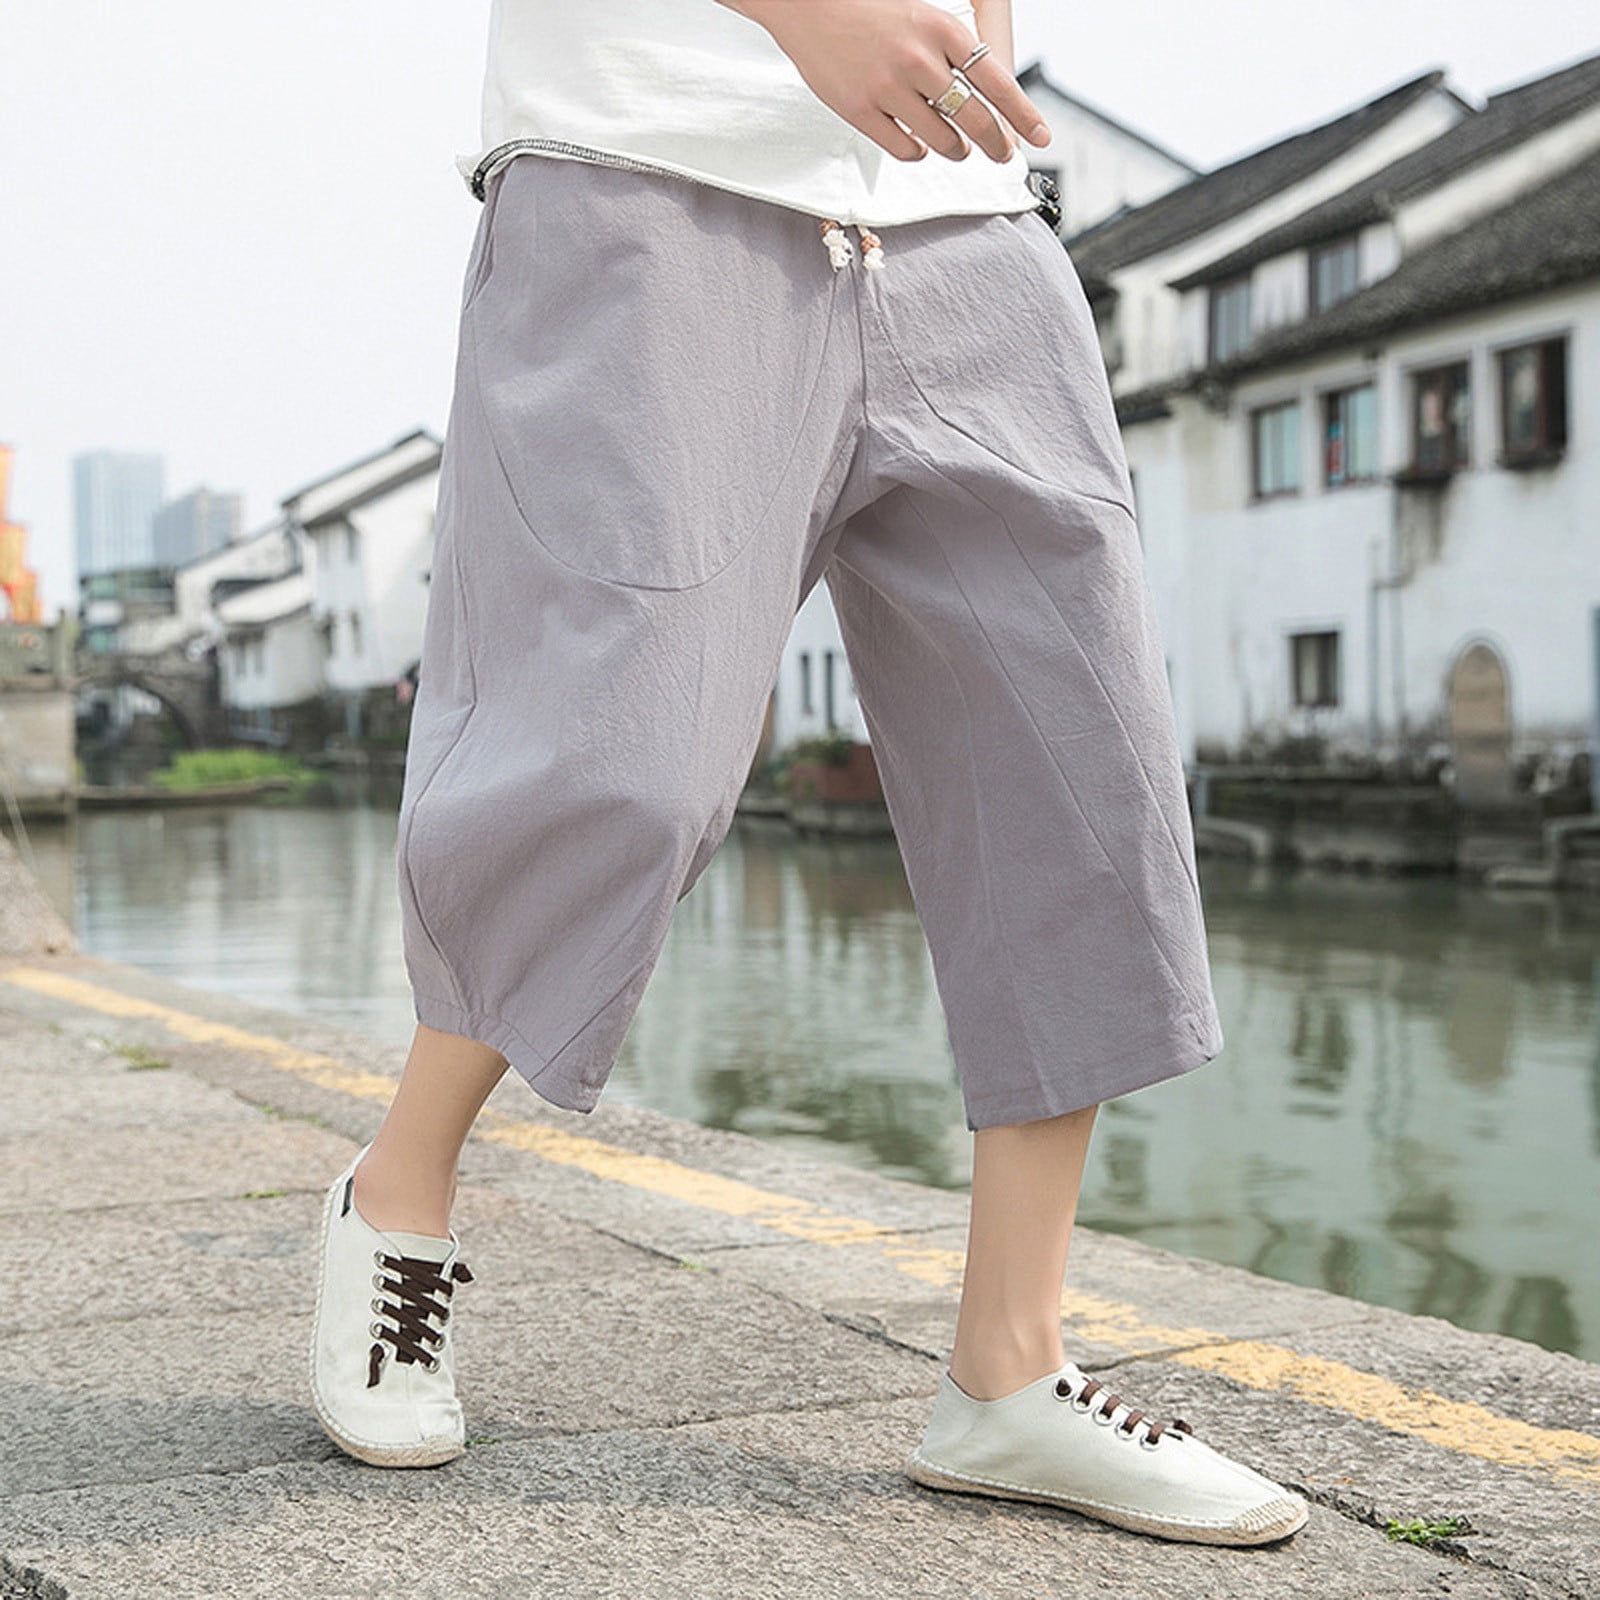 Buy White Gray and Brown Cotton Flex Solid Pant for Best Price, Reviews,  Free Shipping